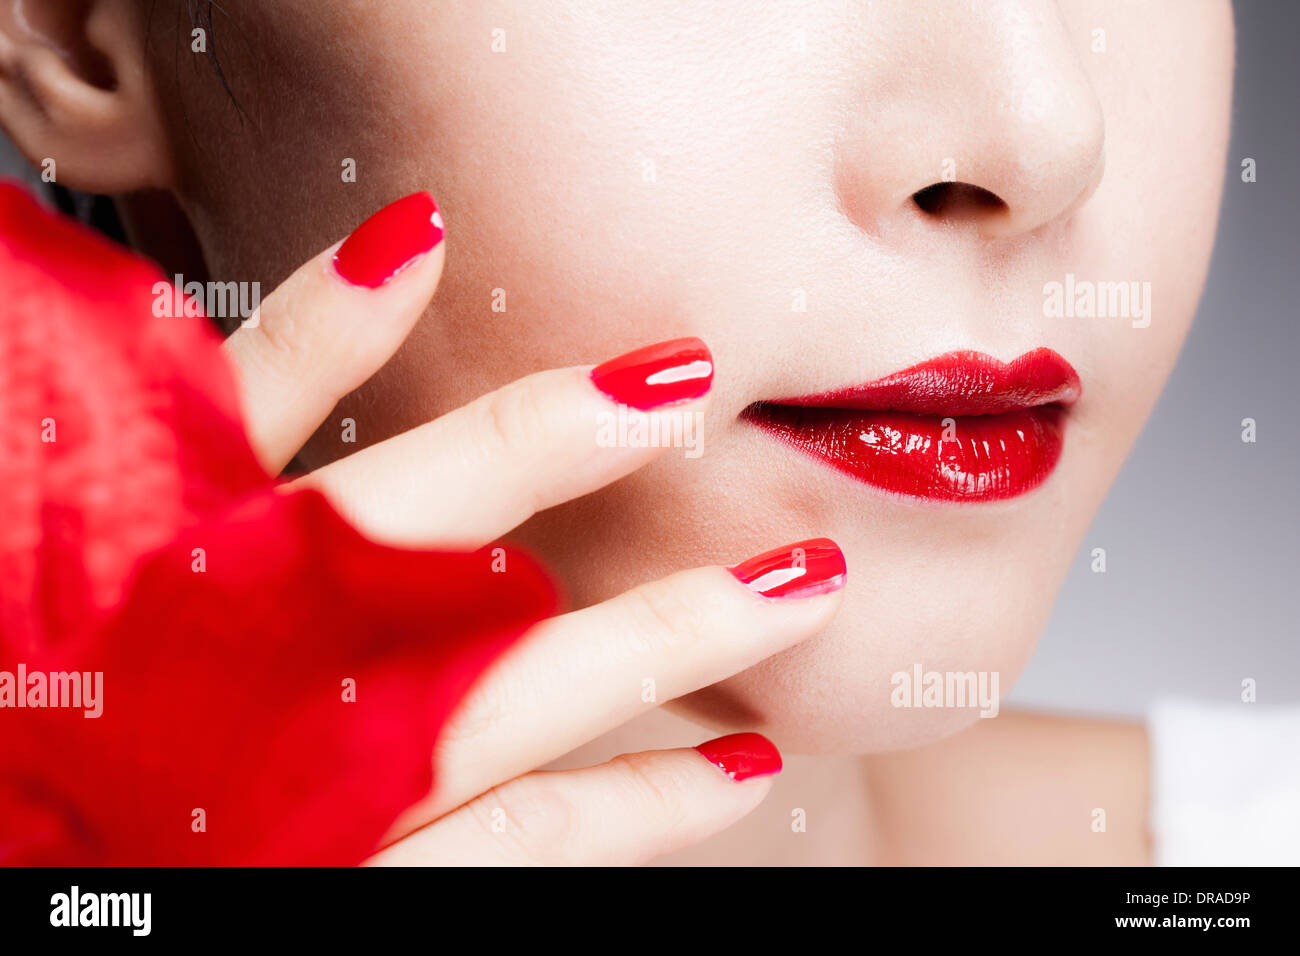 close up shot of a woman's red nails on a face with red lips Stock Photo